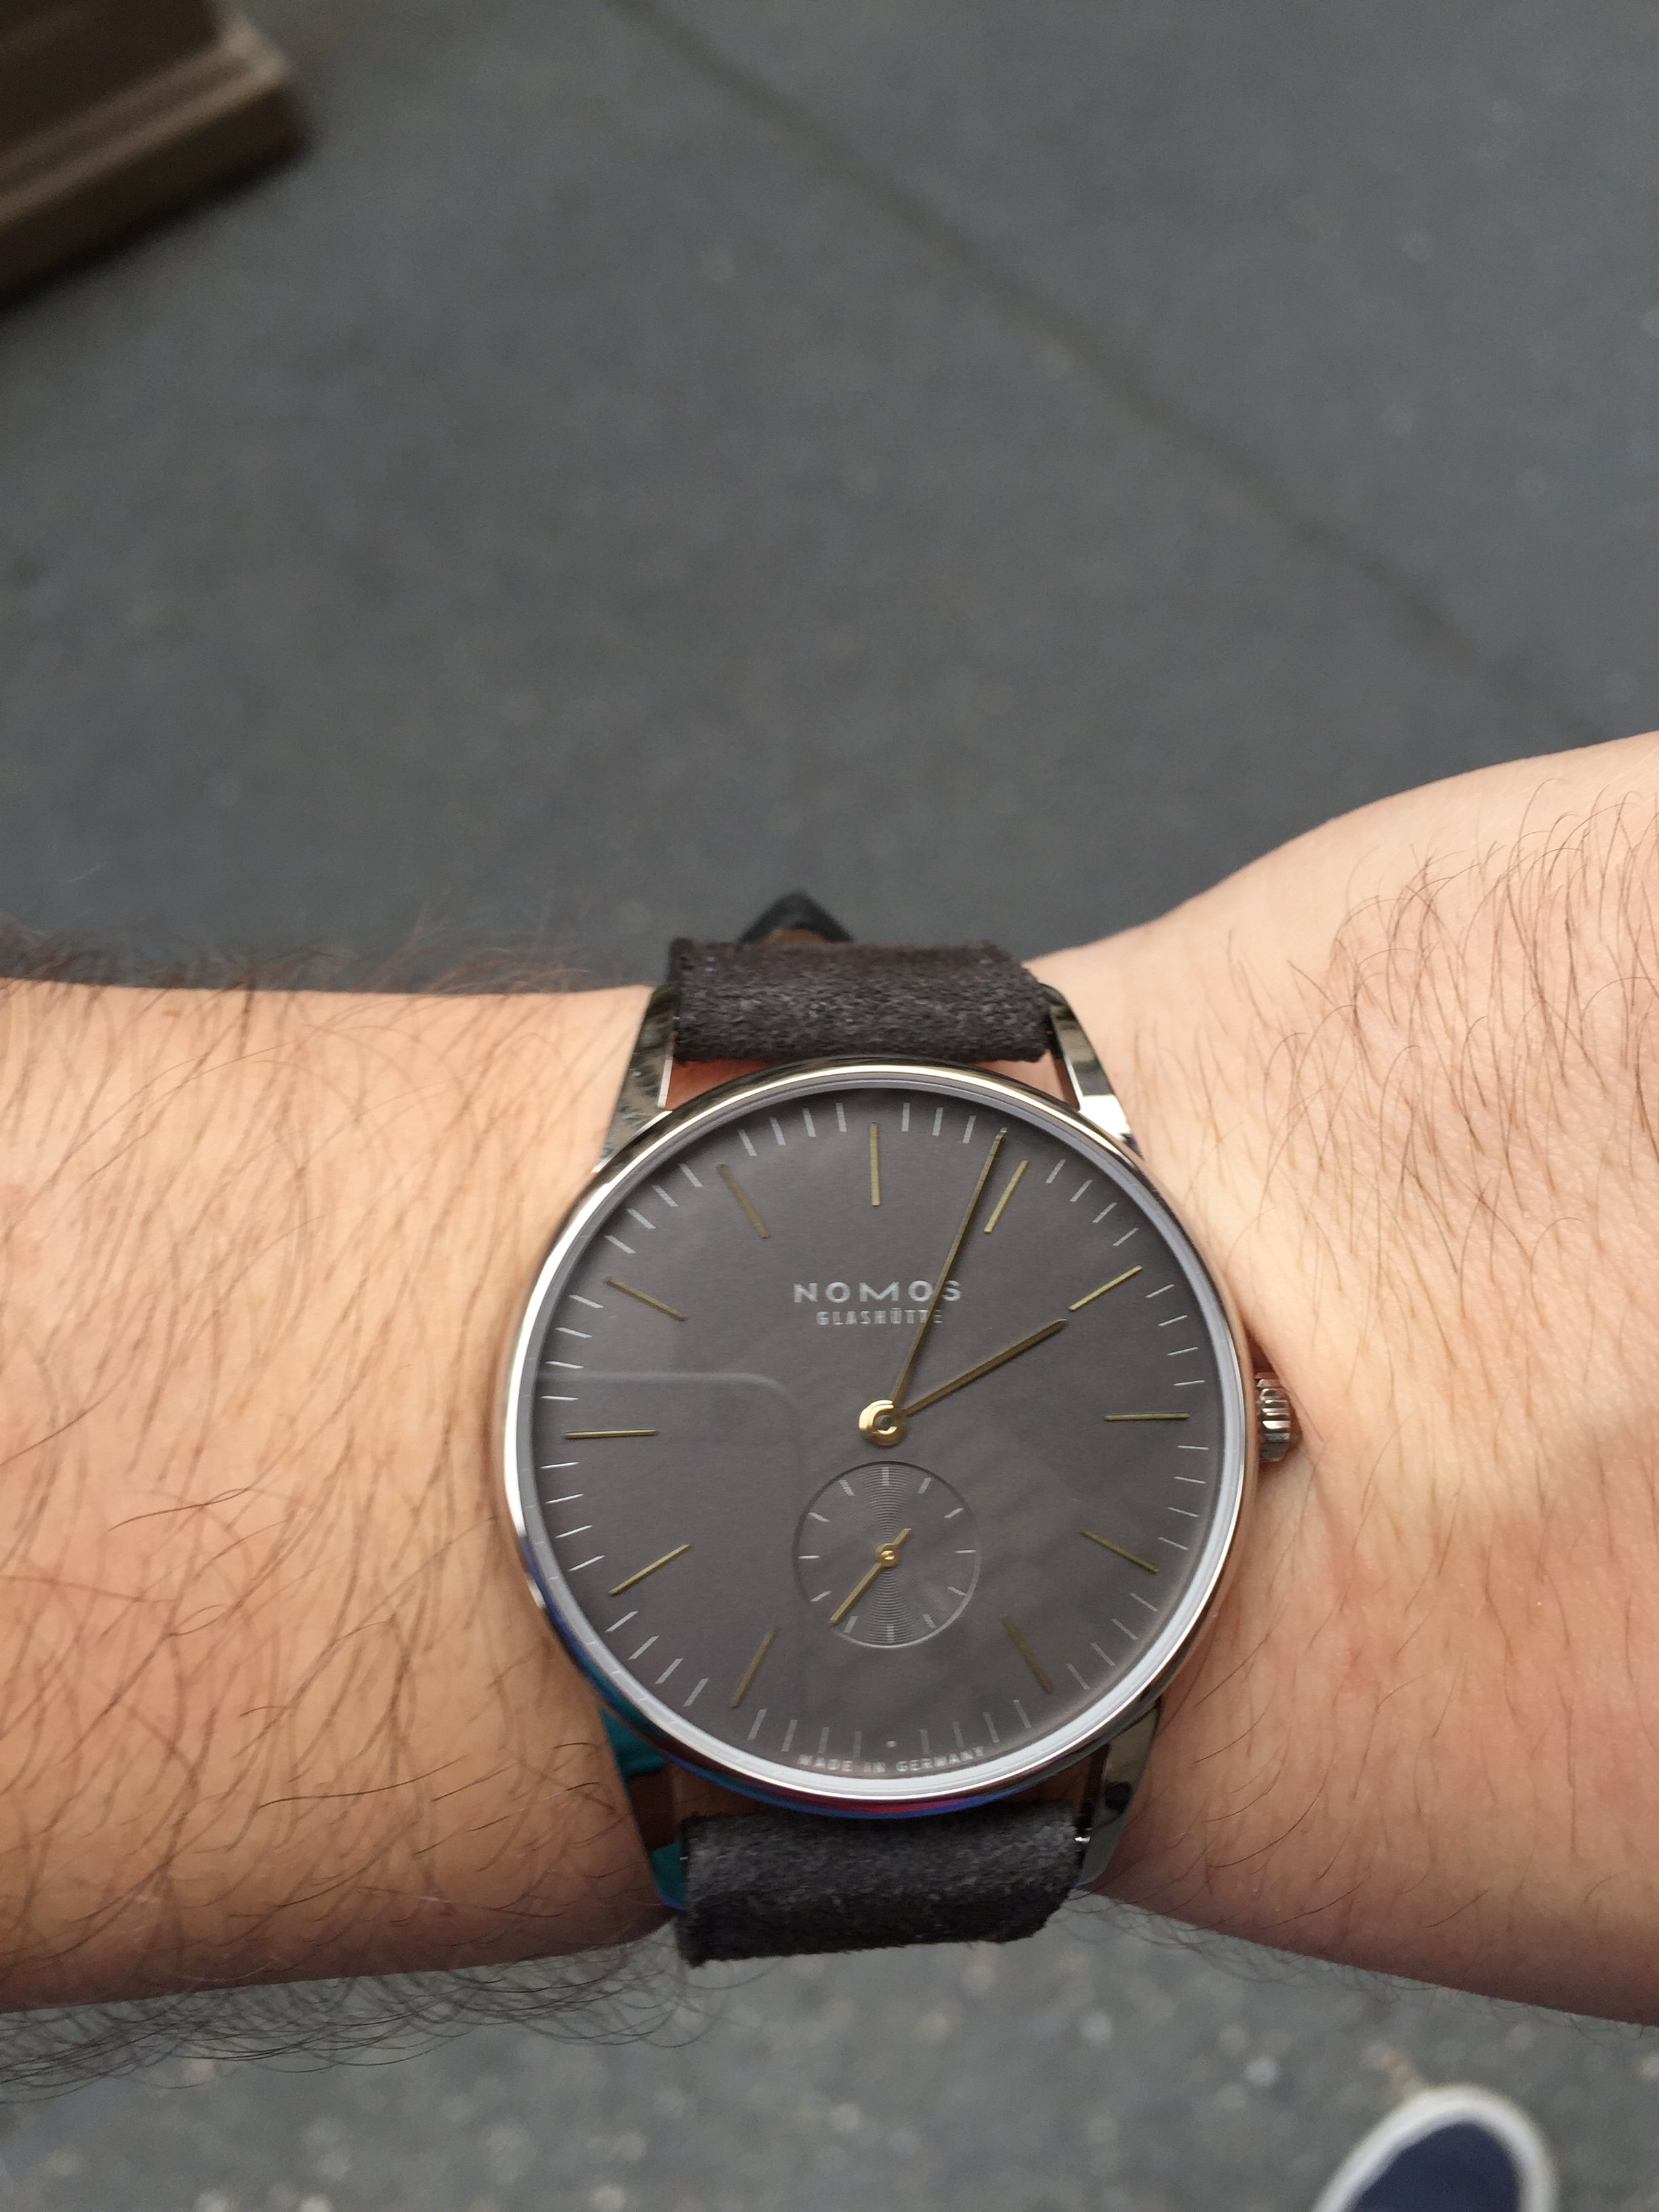 Incoming-Nomos Orion(1989) 38mm | Omega Forums